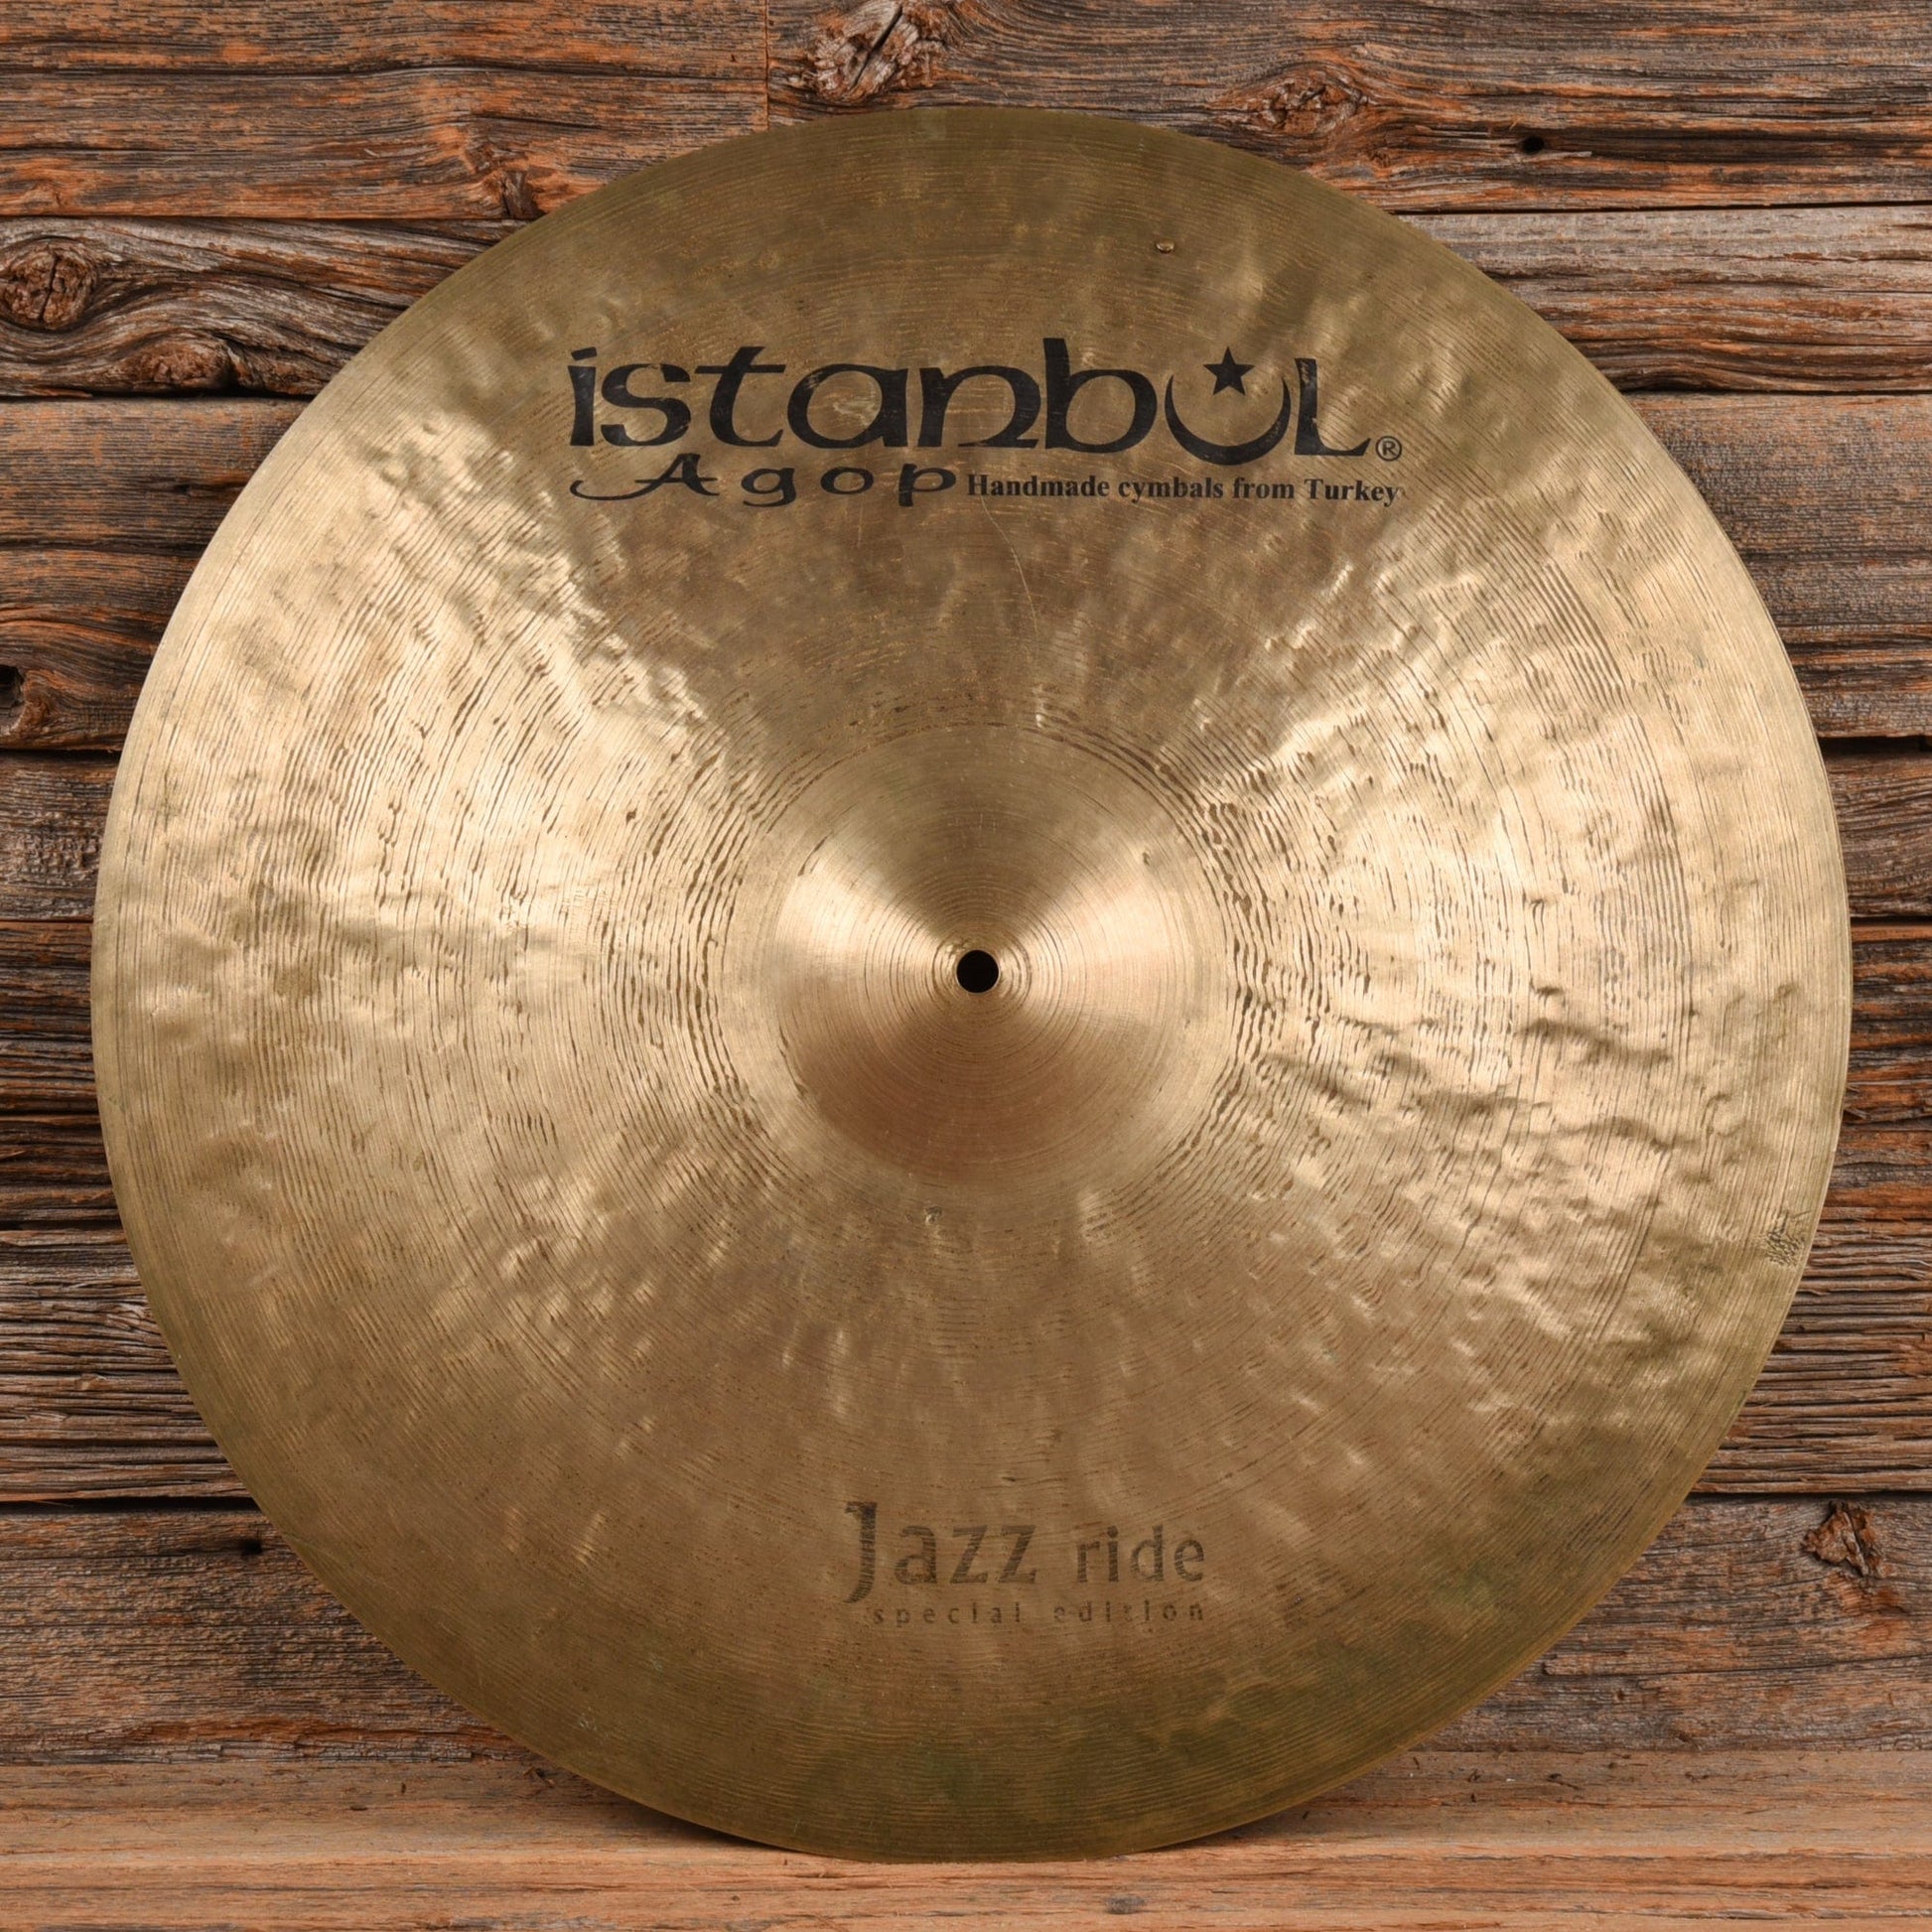 Istanbul Agop 22" Jazz Ride Cymbal USED Drums and Percussion